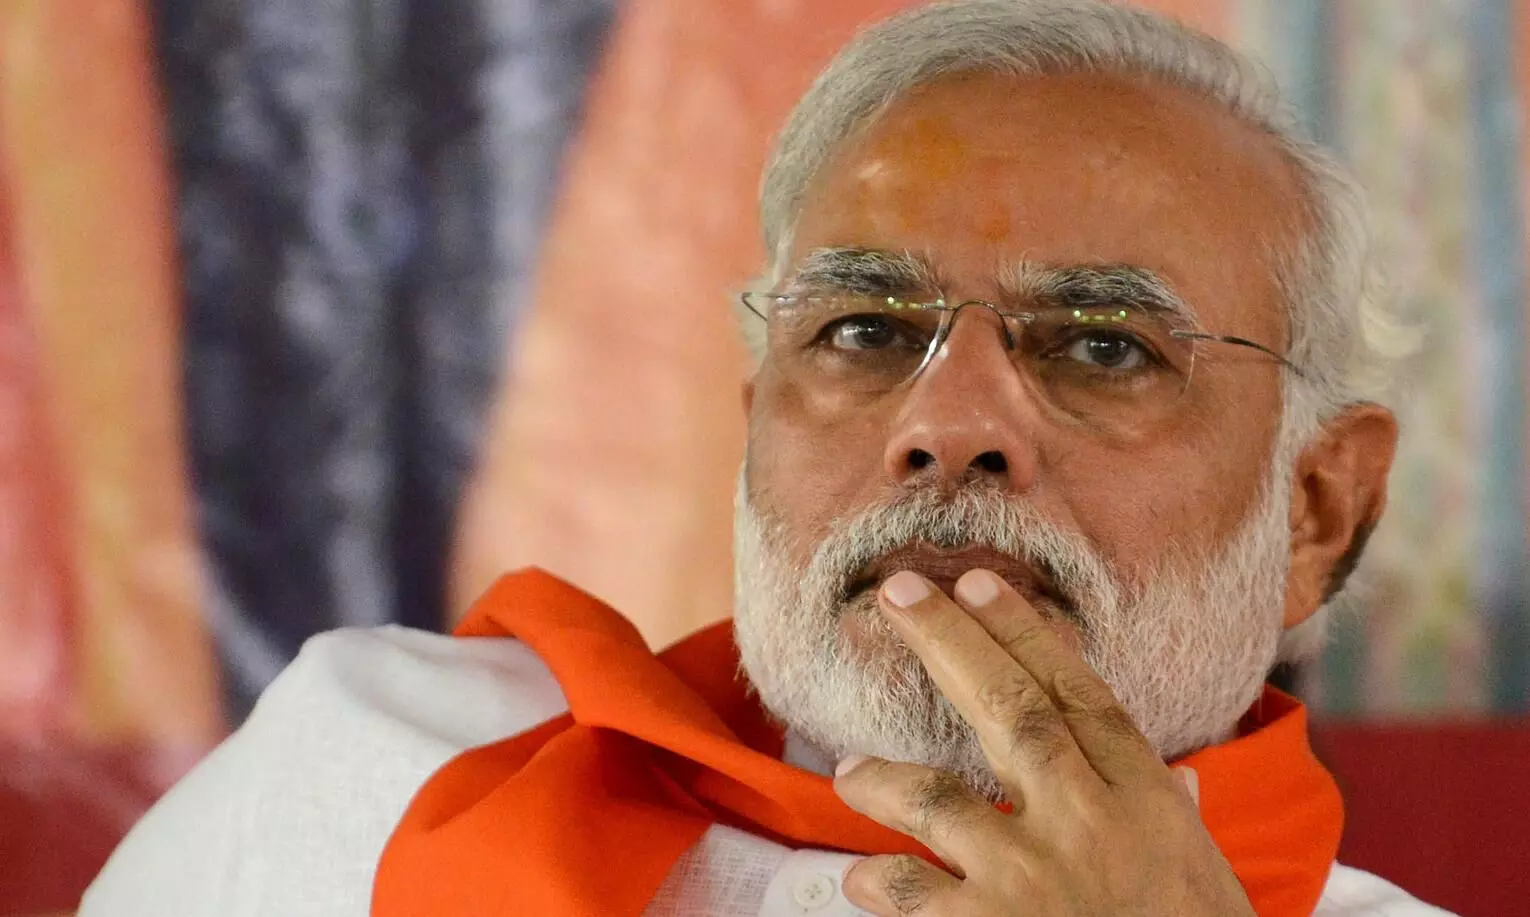 AAP stirs ‘illiterate’ PM Modi jibe, Cong flags limited transparency in ‘New India’